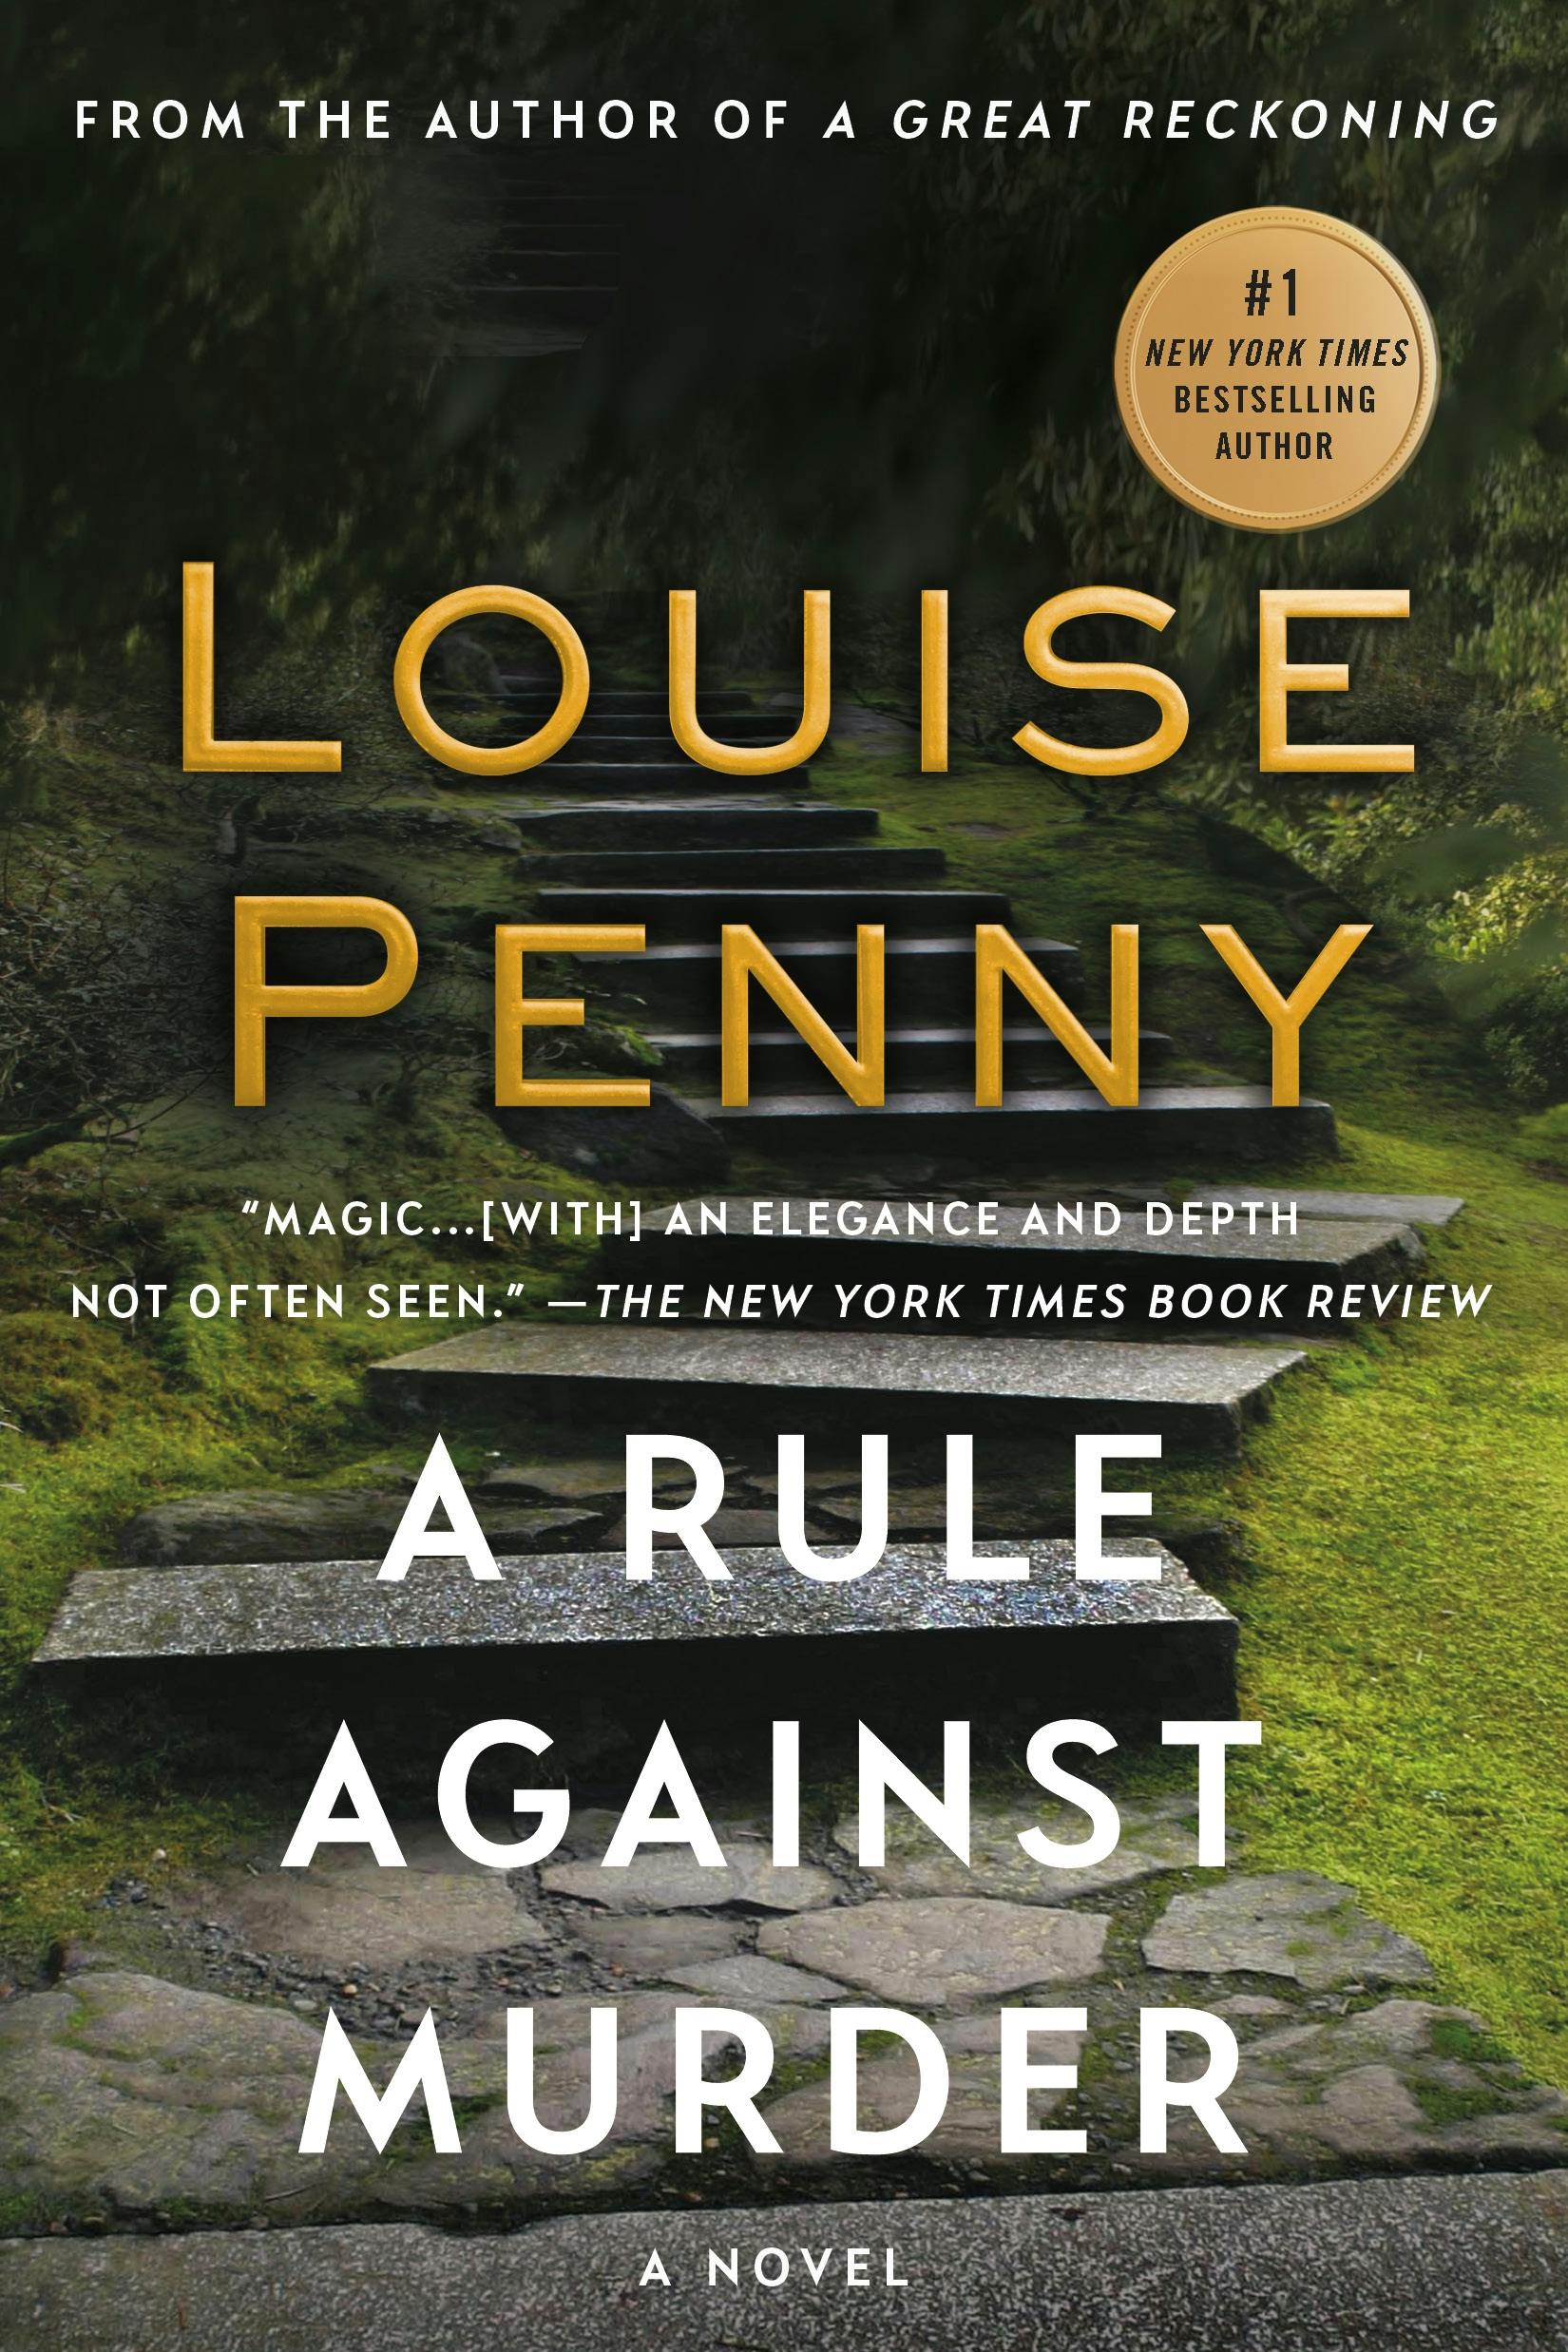 Bitter Tea and Mystery: The Nature of the Beast: Louise Penny